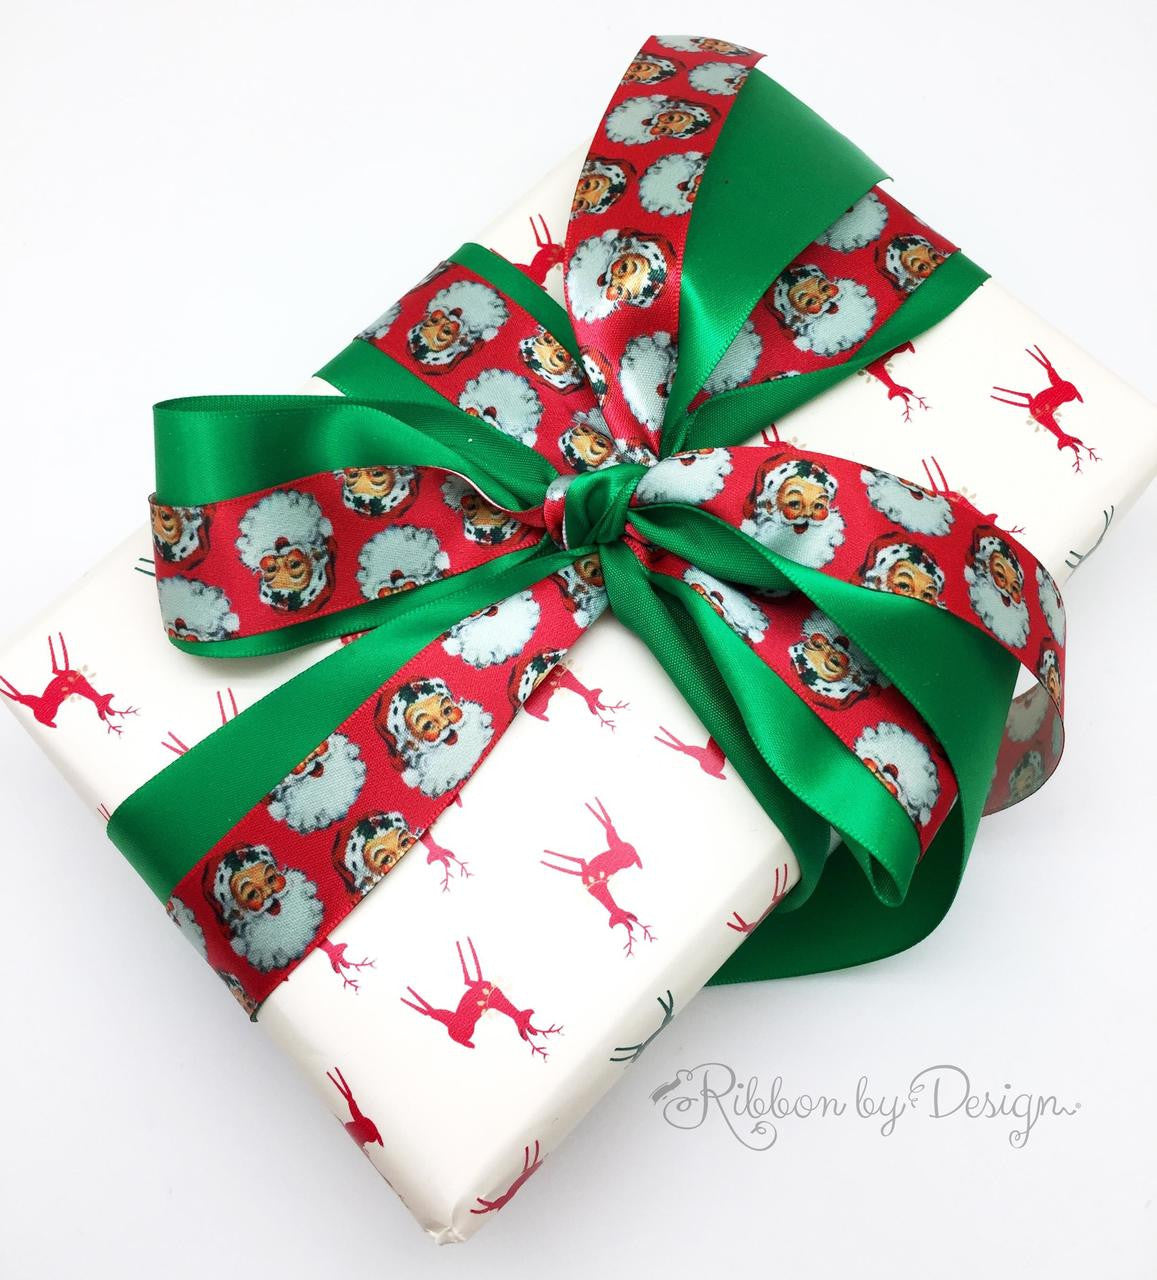 Gift wrapping is so much fun! We love to combine patterns to create truly special packages that will make the recipient smile. Mix and match ribbons and paper for a fun and luxurious gift!